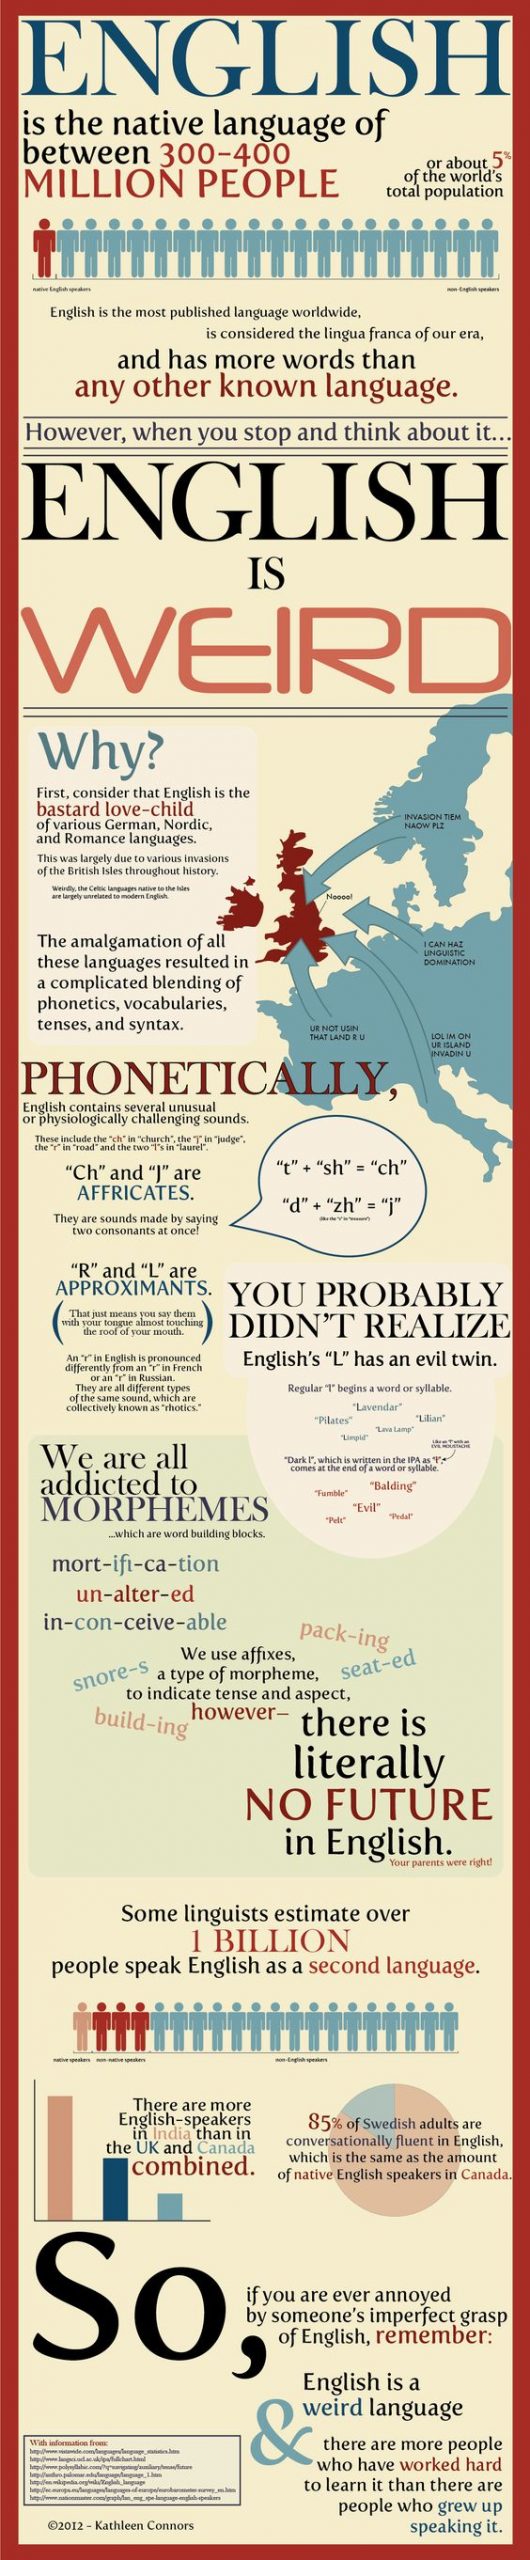 Figure 36.4: English is Weird Infographic